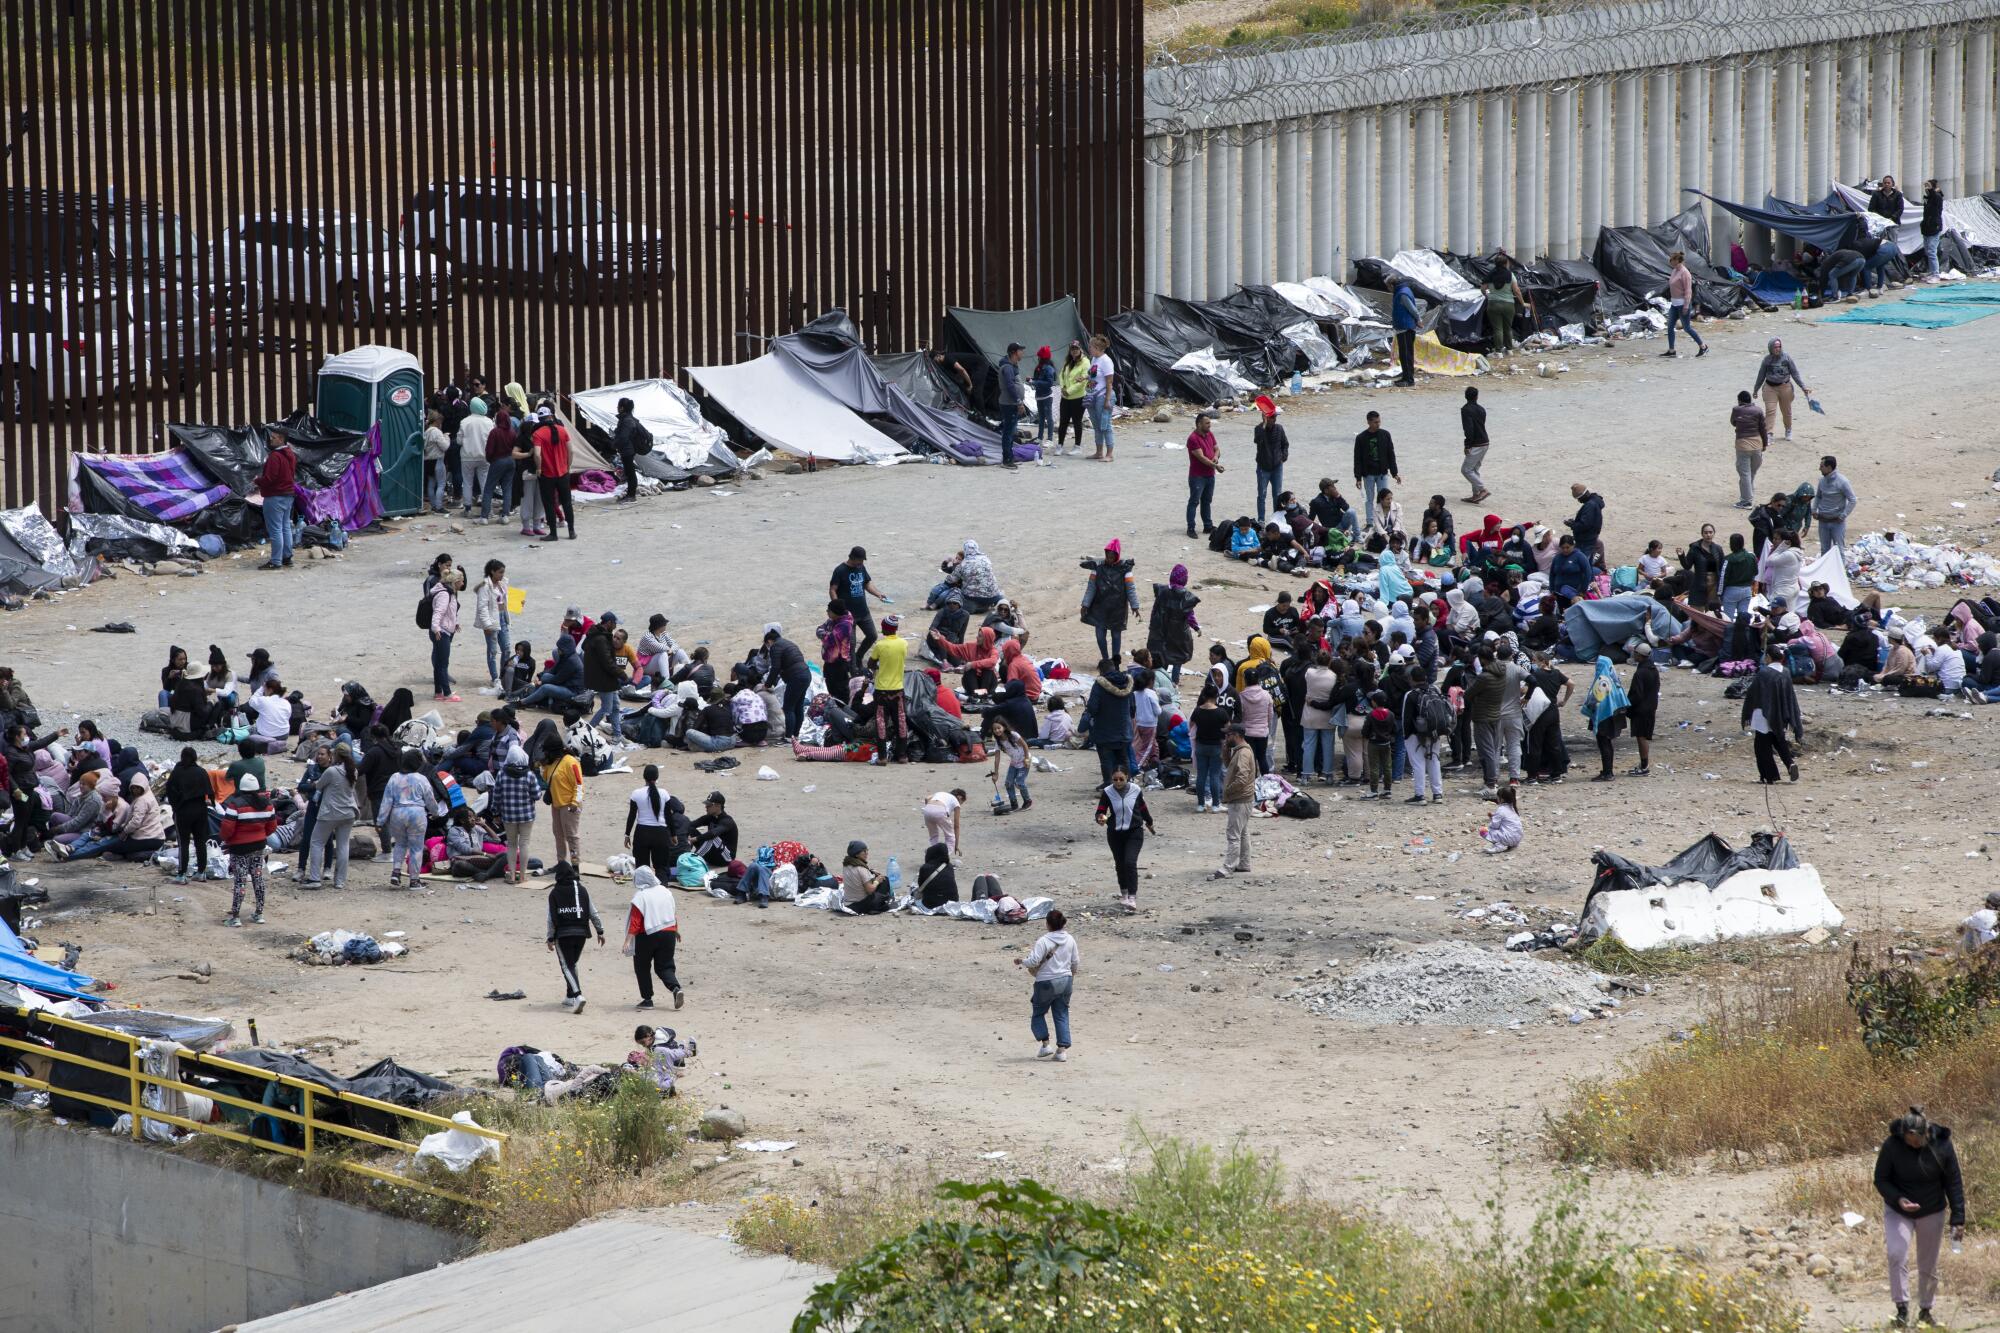 Hundreds of migrants wait between the U.S.-Mexico border walls a day before Title 42 is set to end.